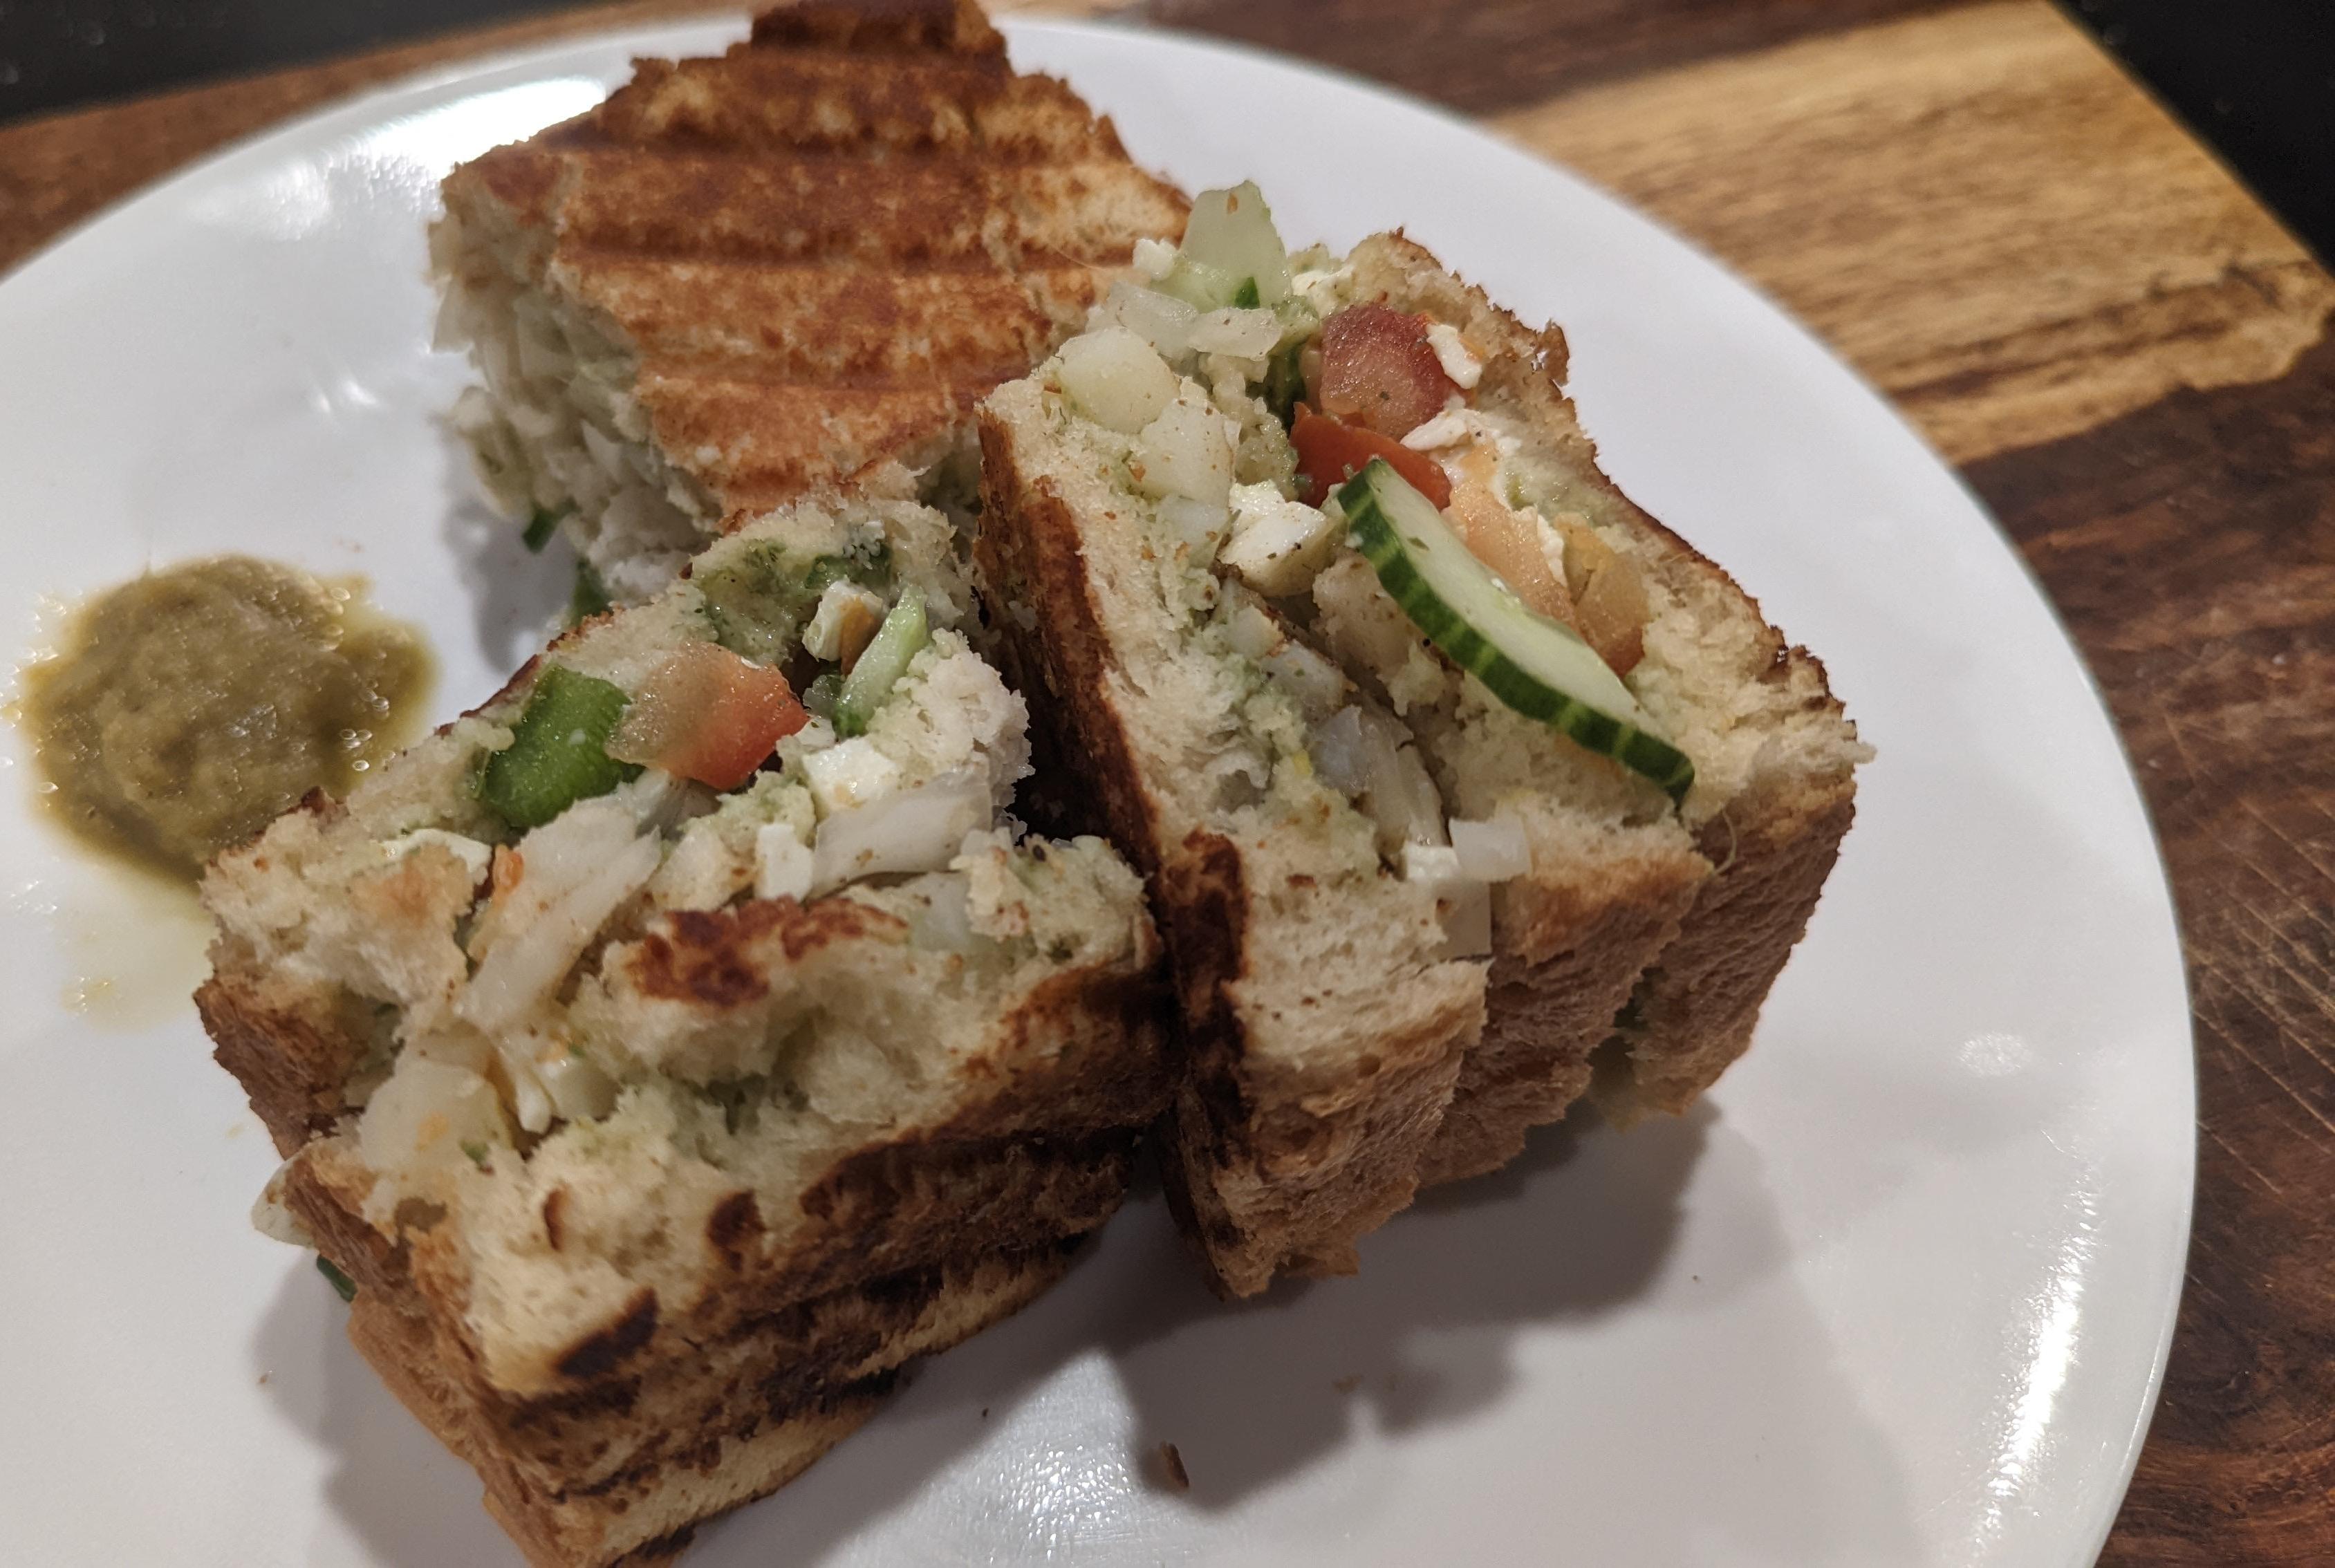 Mumbai Grilled Vegetarian Cheese Sandwich Made With Fresh Baked Bread